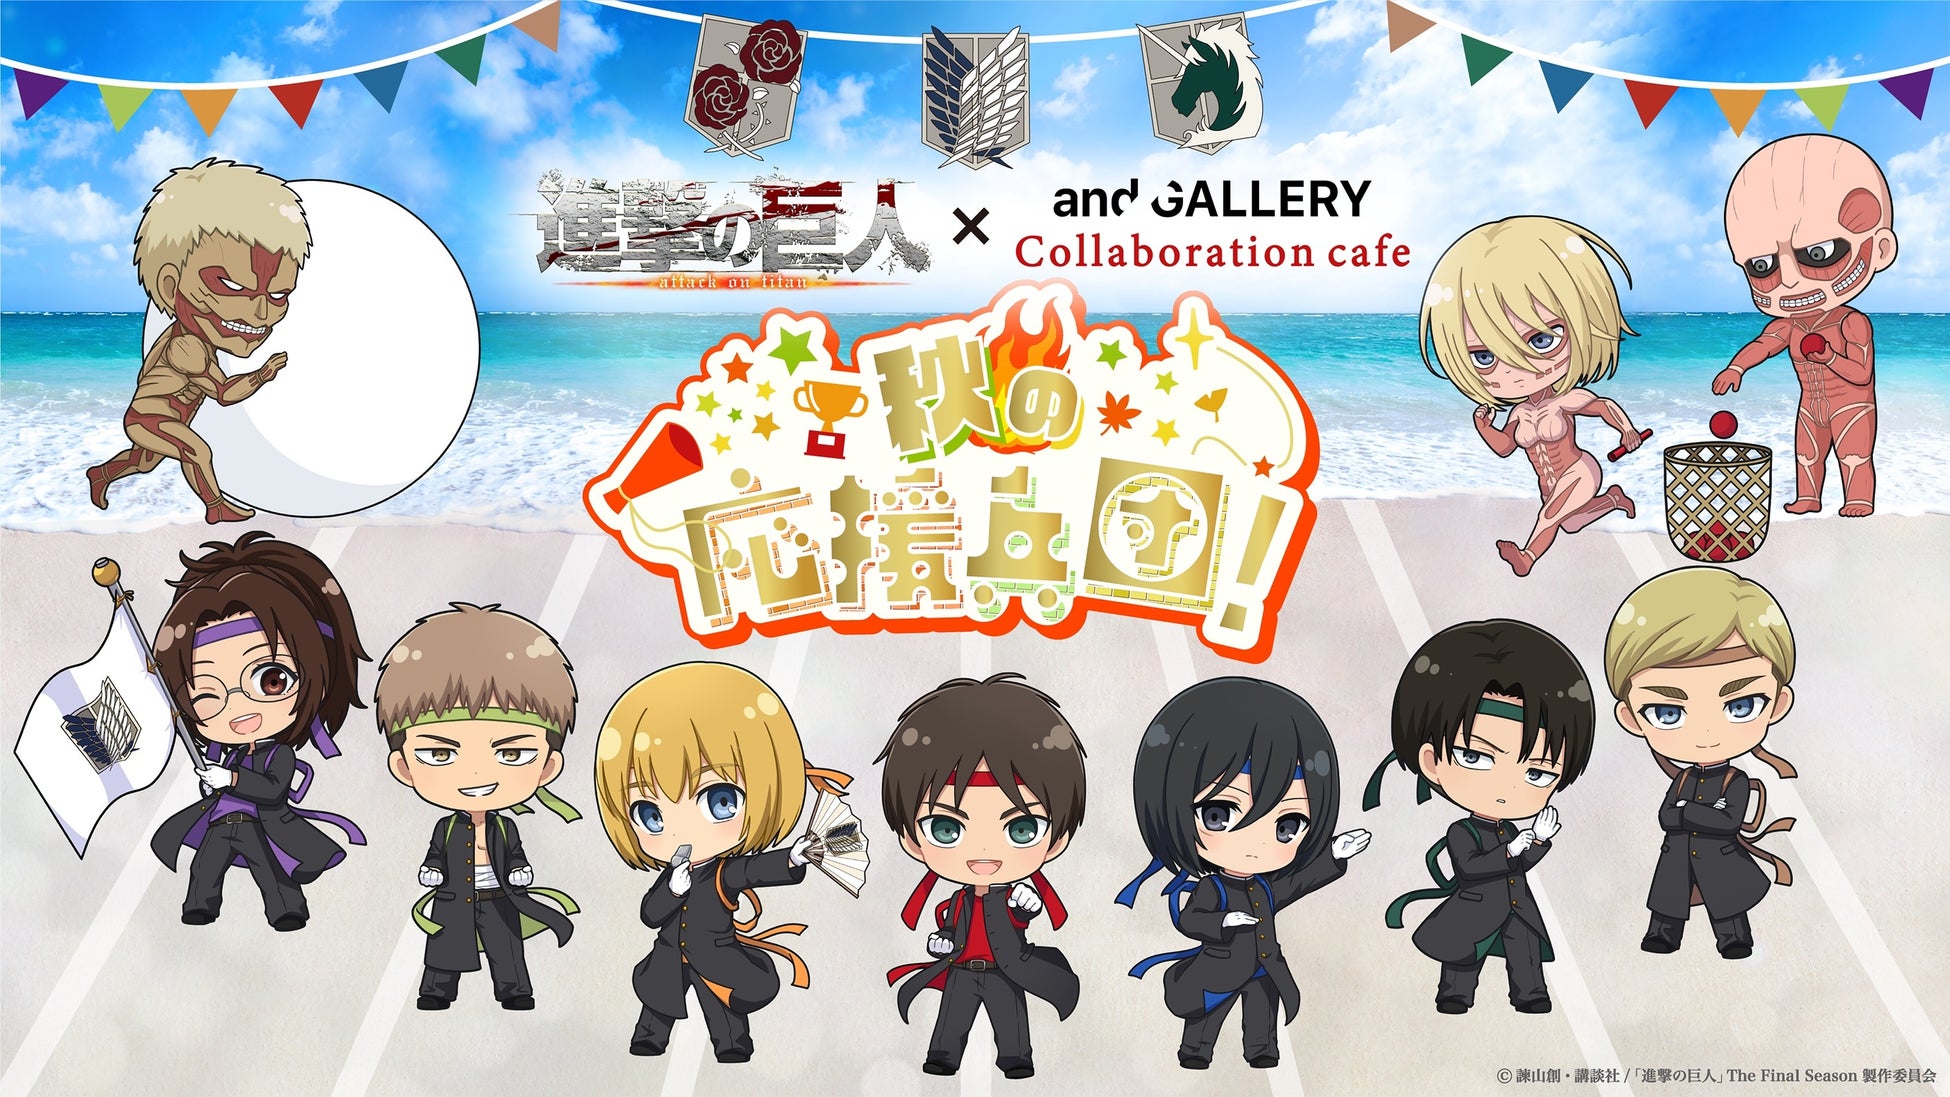 TV ANIMATION 『Attack On Titan』s Collaboration Cafes will open from 9/2 at 「and GALLERY」